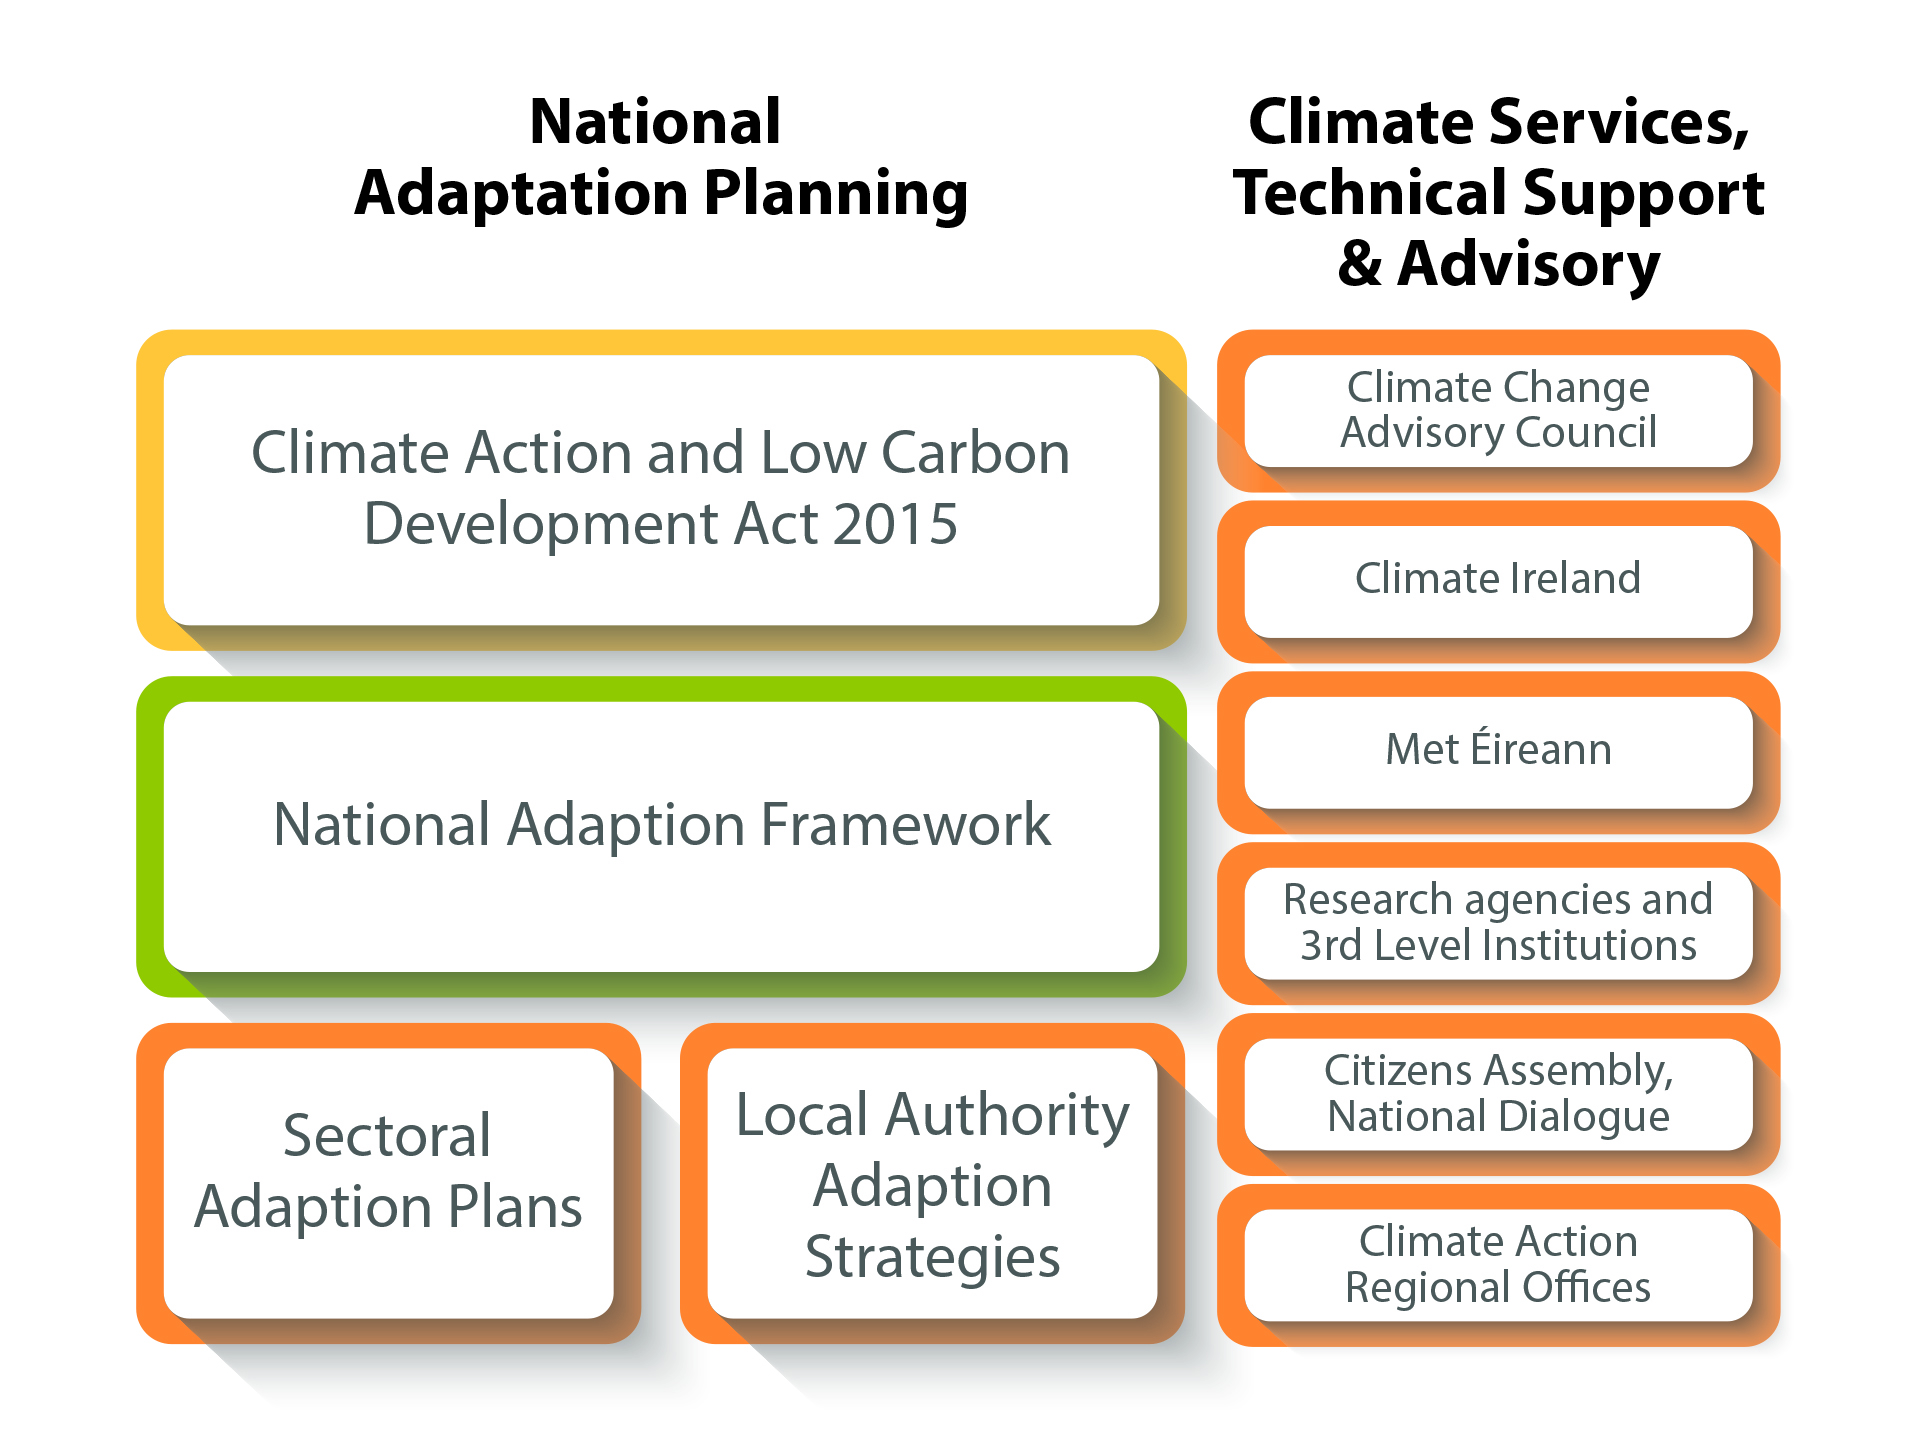 11. Climate Action Westmeath County Council